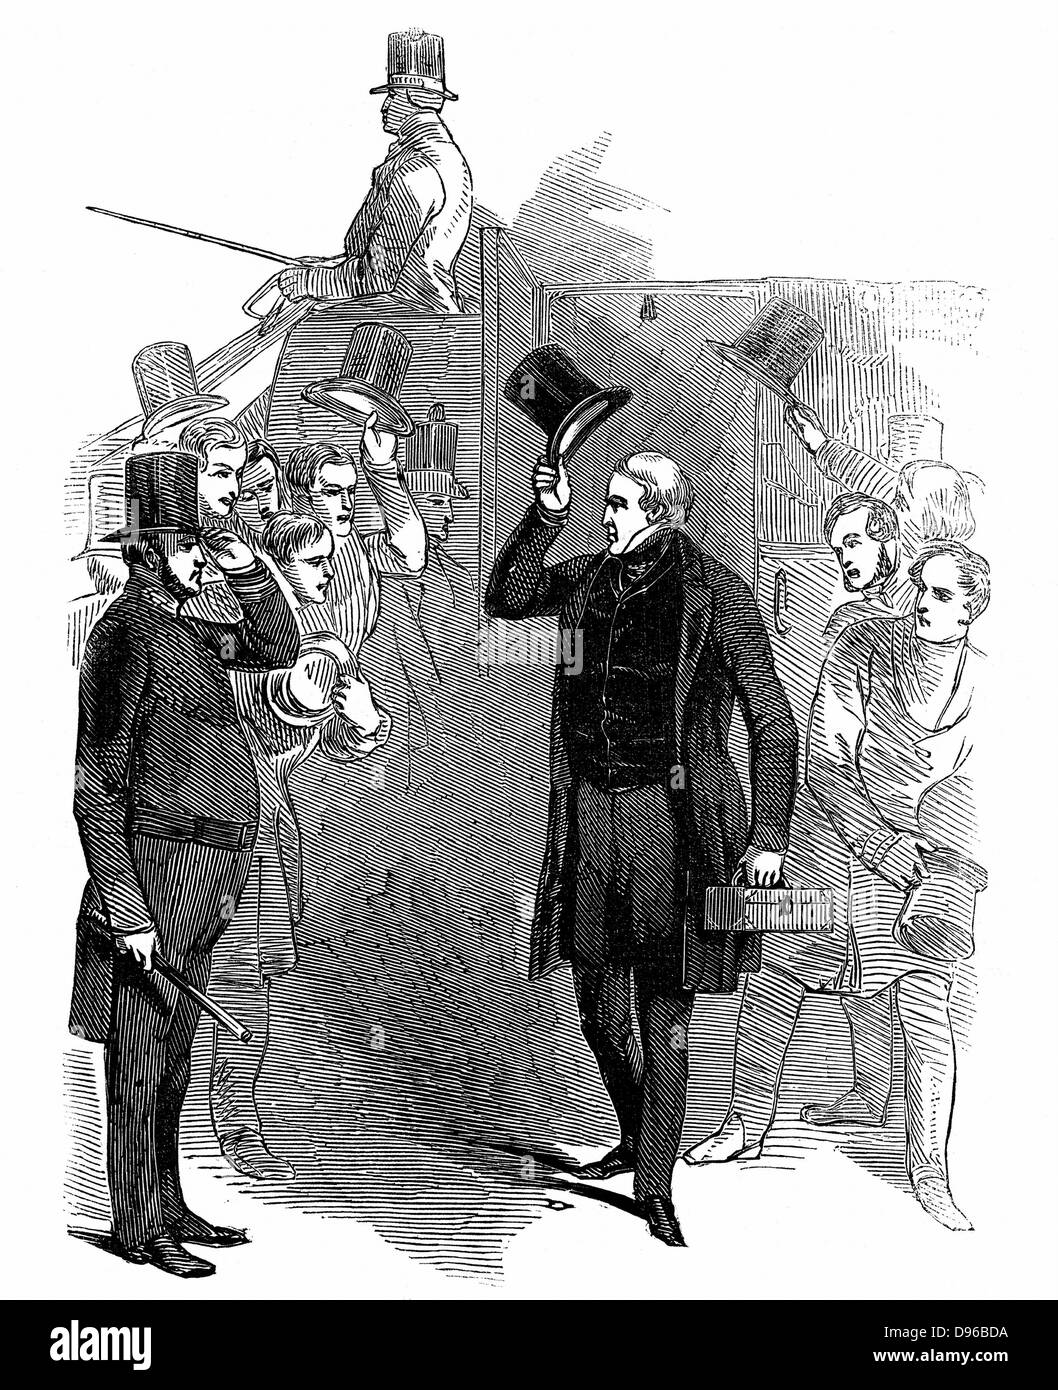 Robert Peel (1788-1850) British statesman, arriving at House of Commons, January, 1846, being saluted by a member of the London police force which he reformed, and which became known as 'Peelers' or 'Bobbies. Woodcut, 1846. Stock Photo